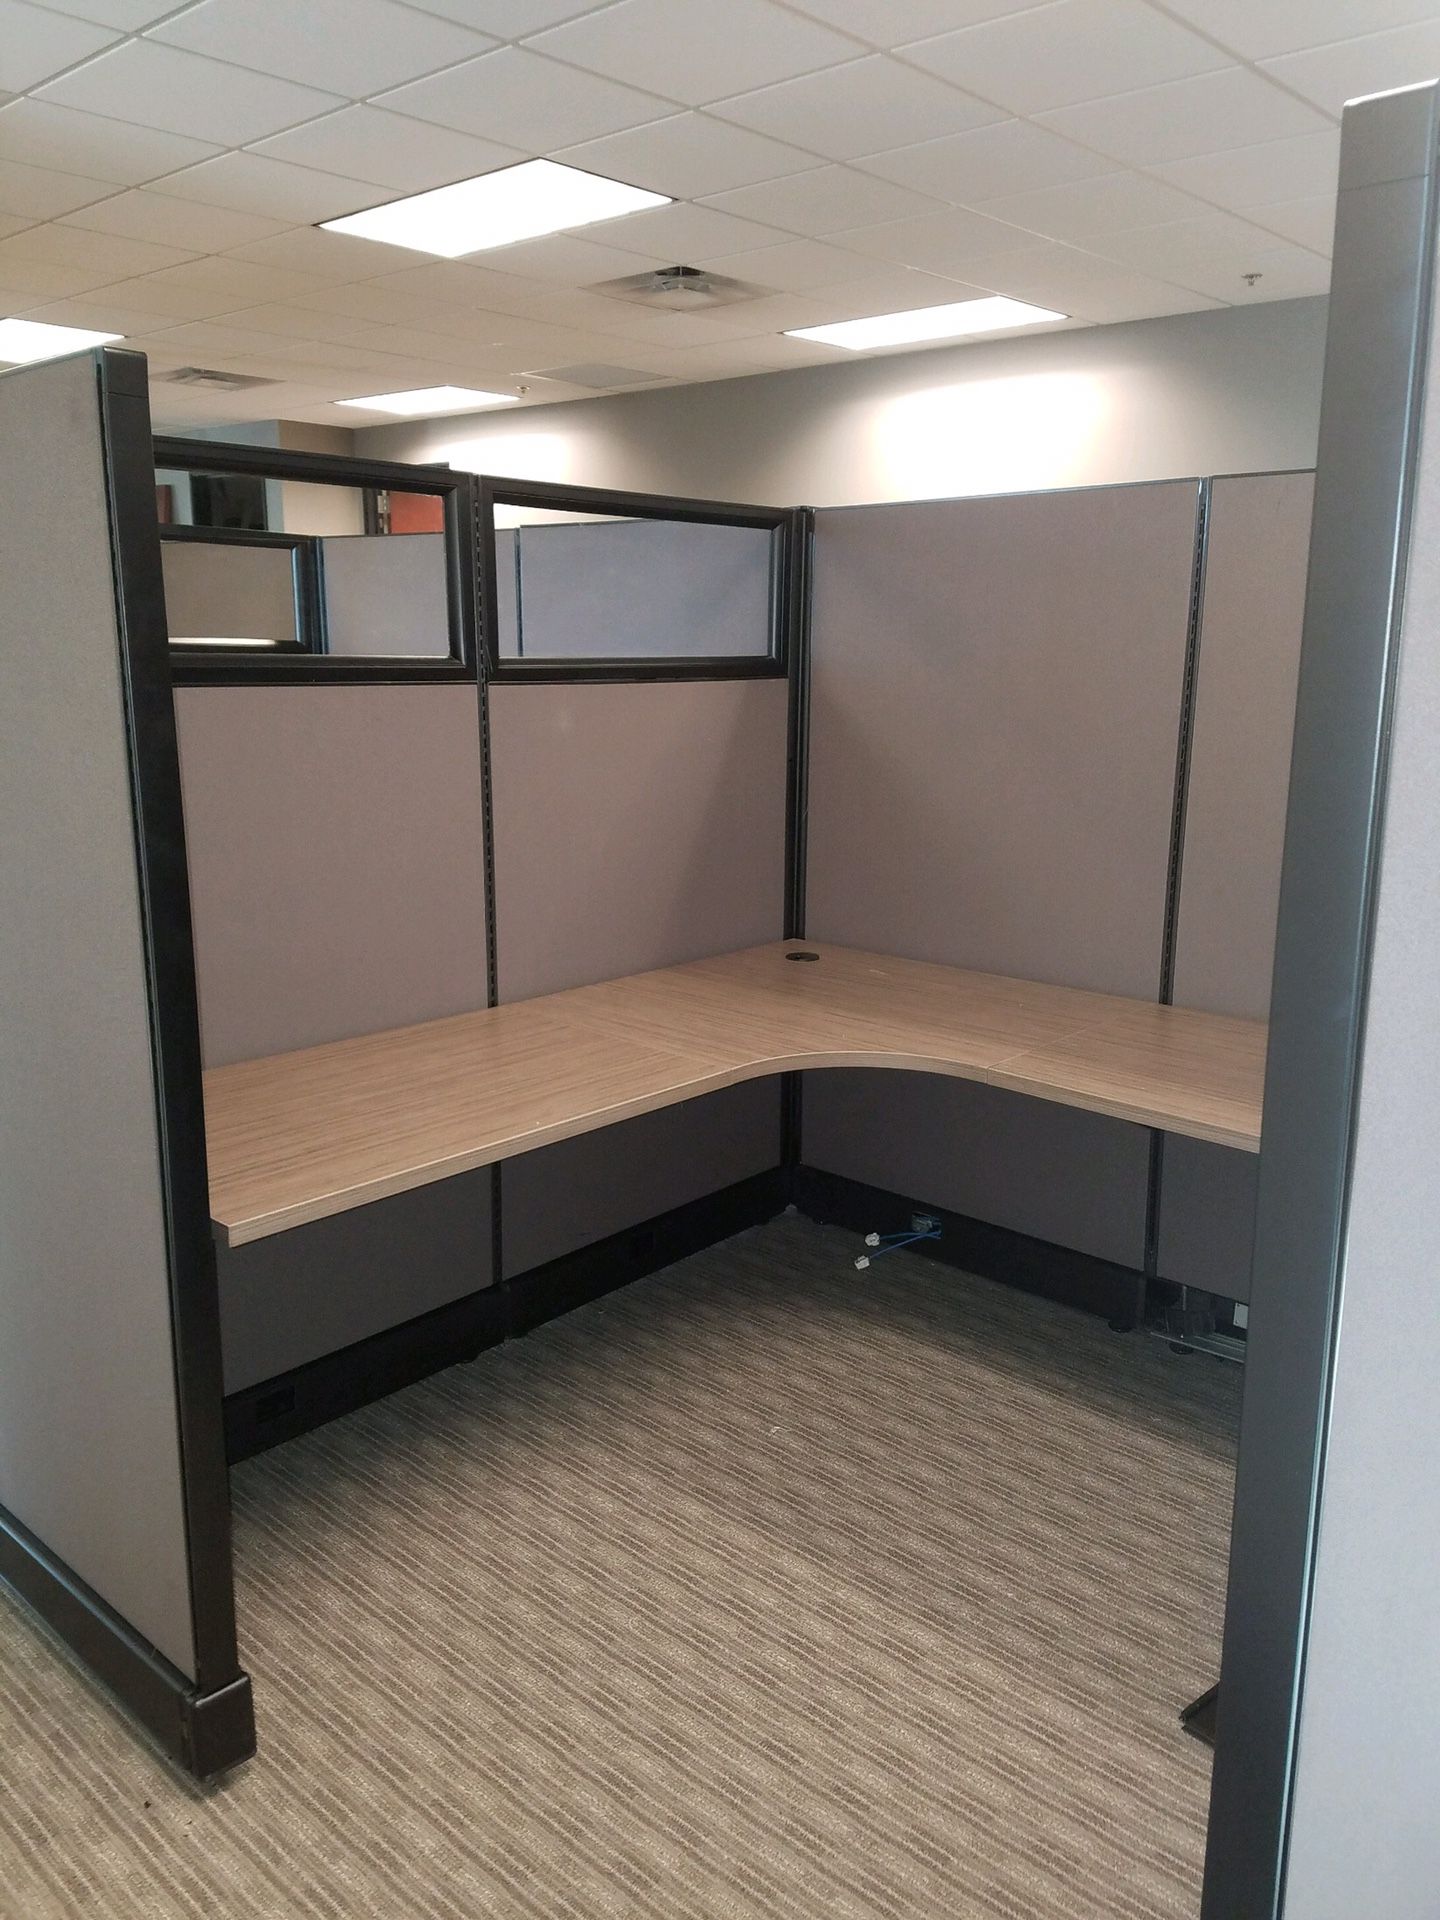 Hermon Miller glasstop cubicles in good used condition can be custom refurbished Fabric and work surfaces